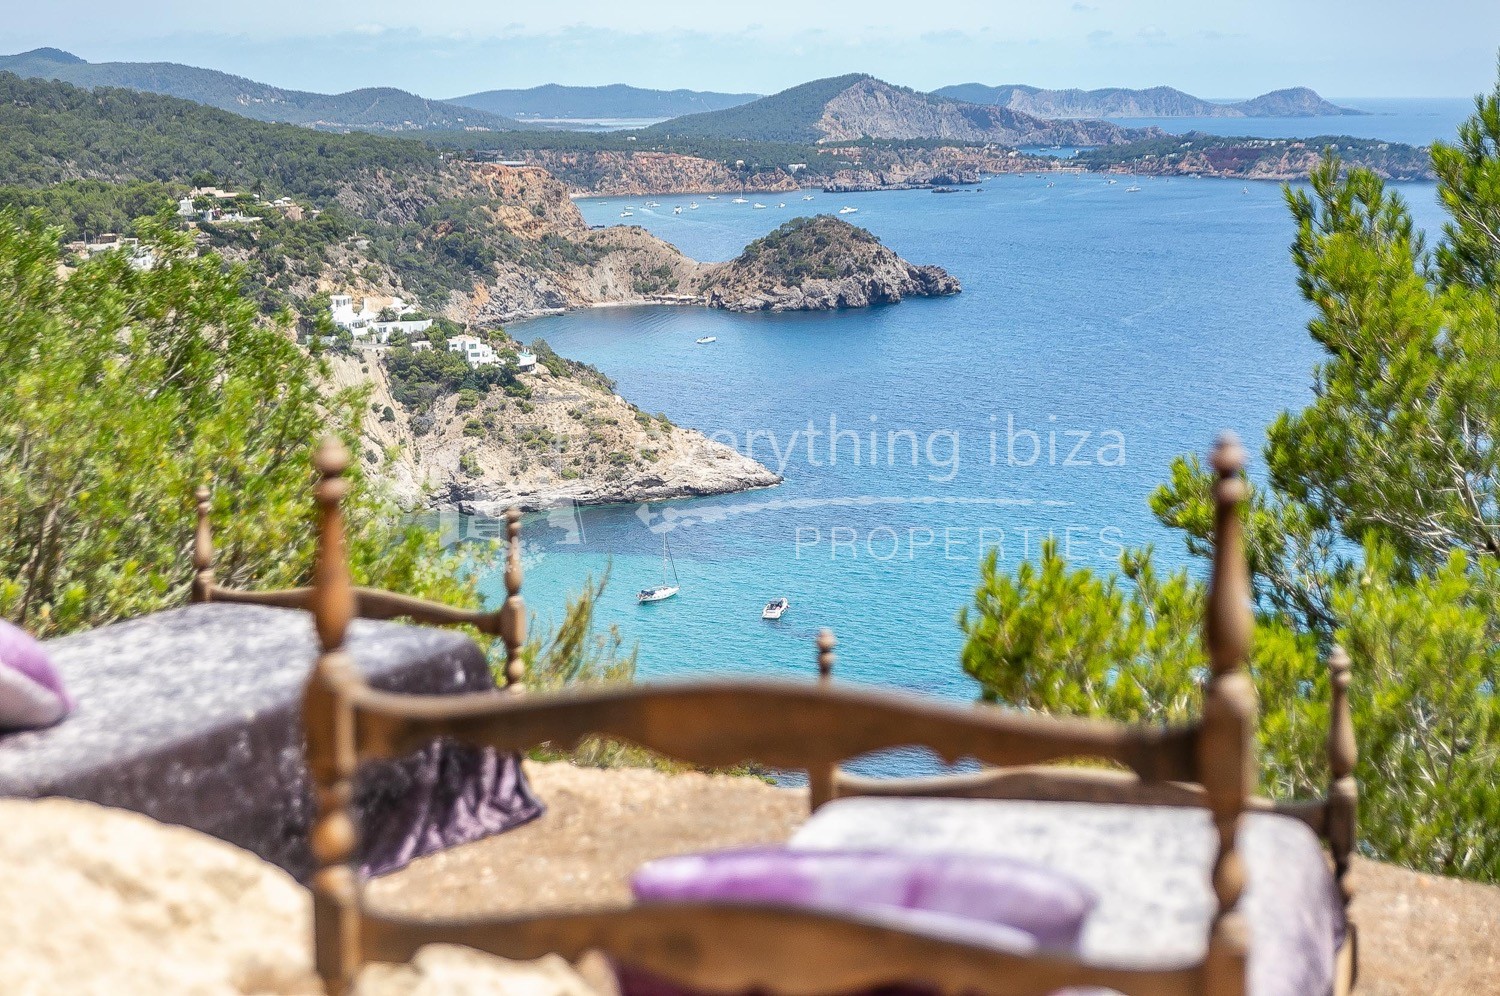 Majestic luxury villa for sale by everything ibiza Properties